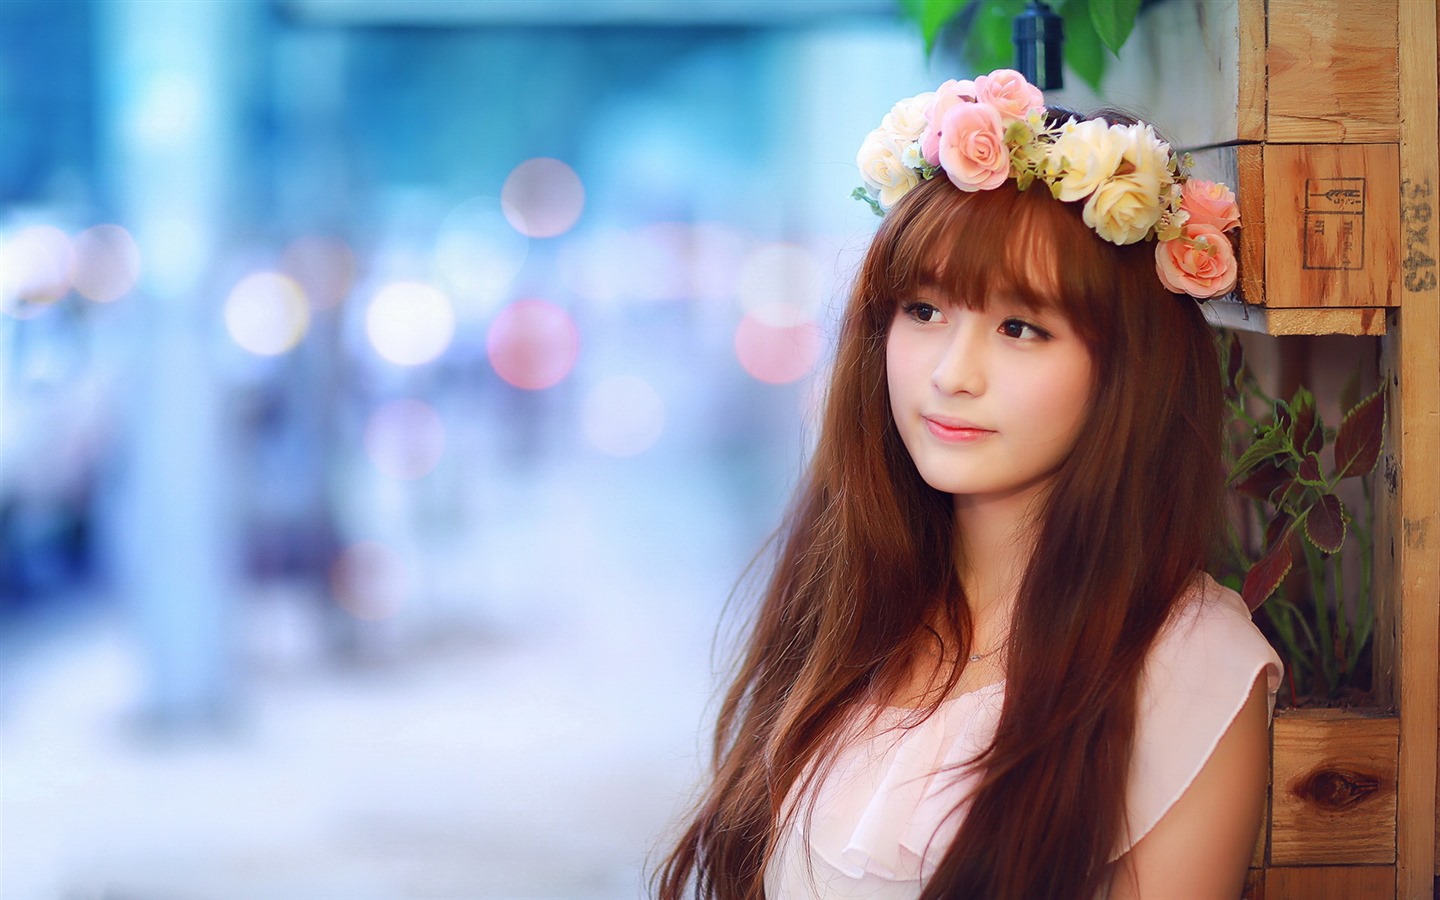 Pure and lovely young Asian girl HD wallpapers collection (2) #33 - 1440x900